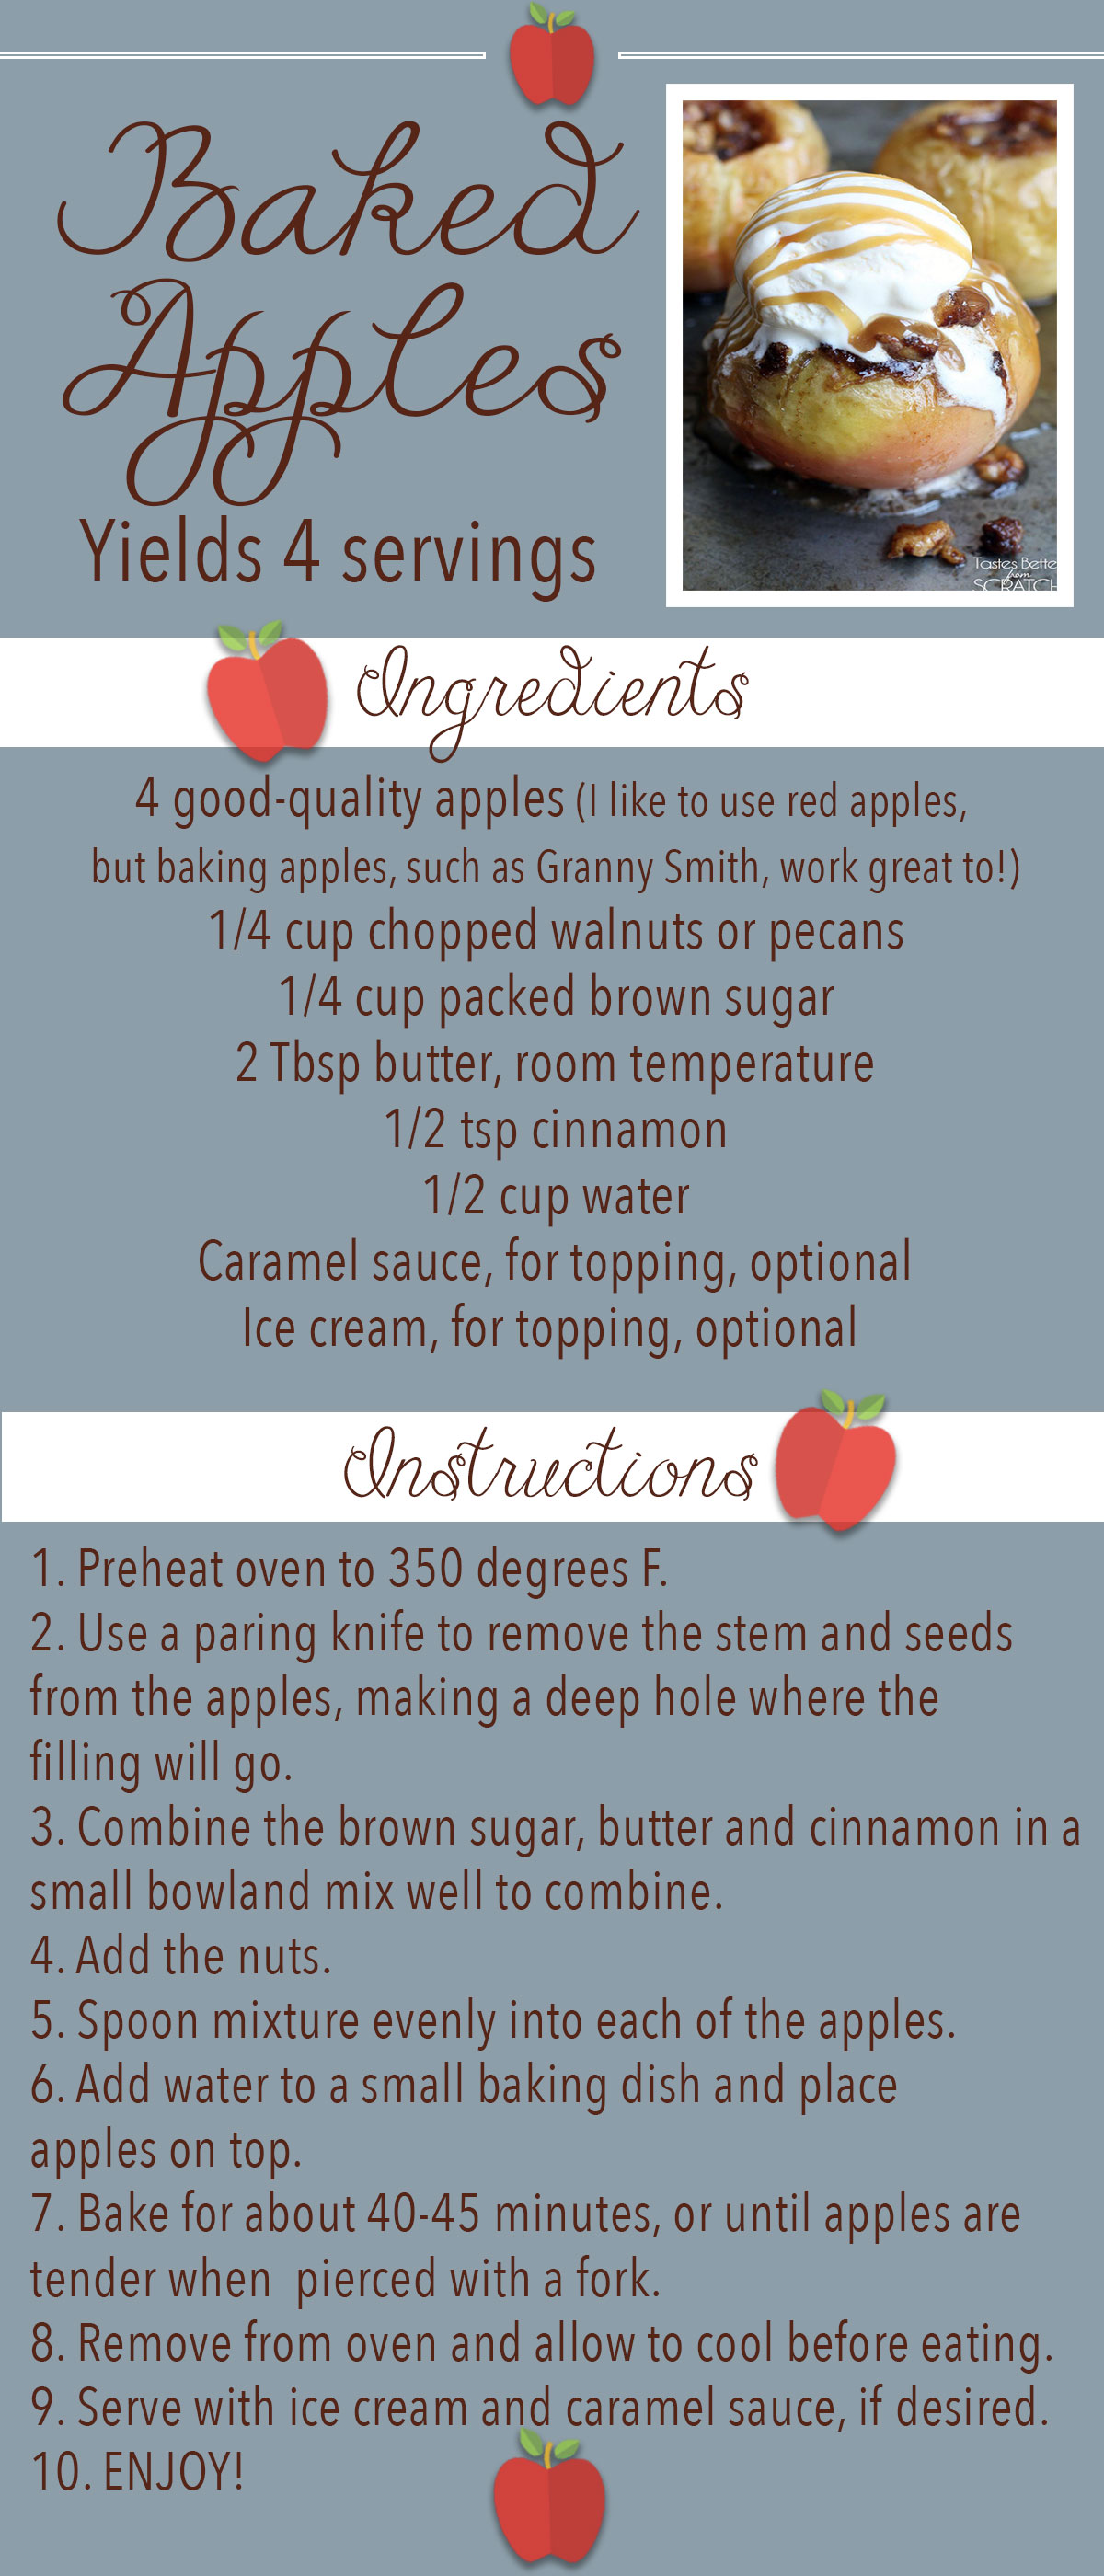 Baked Apples Recipe Card